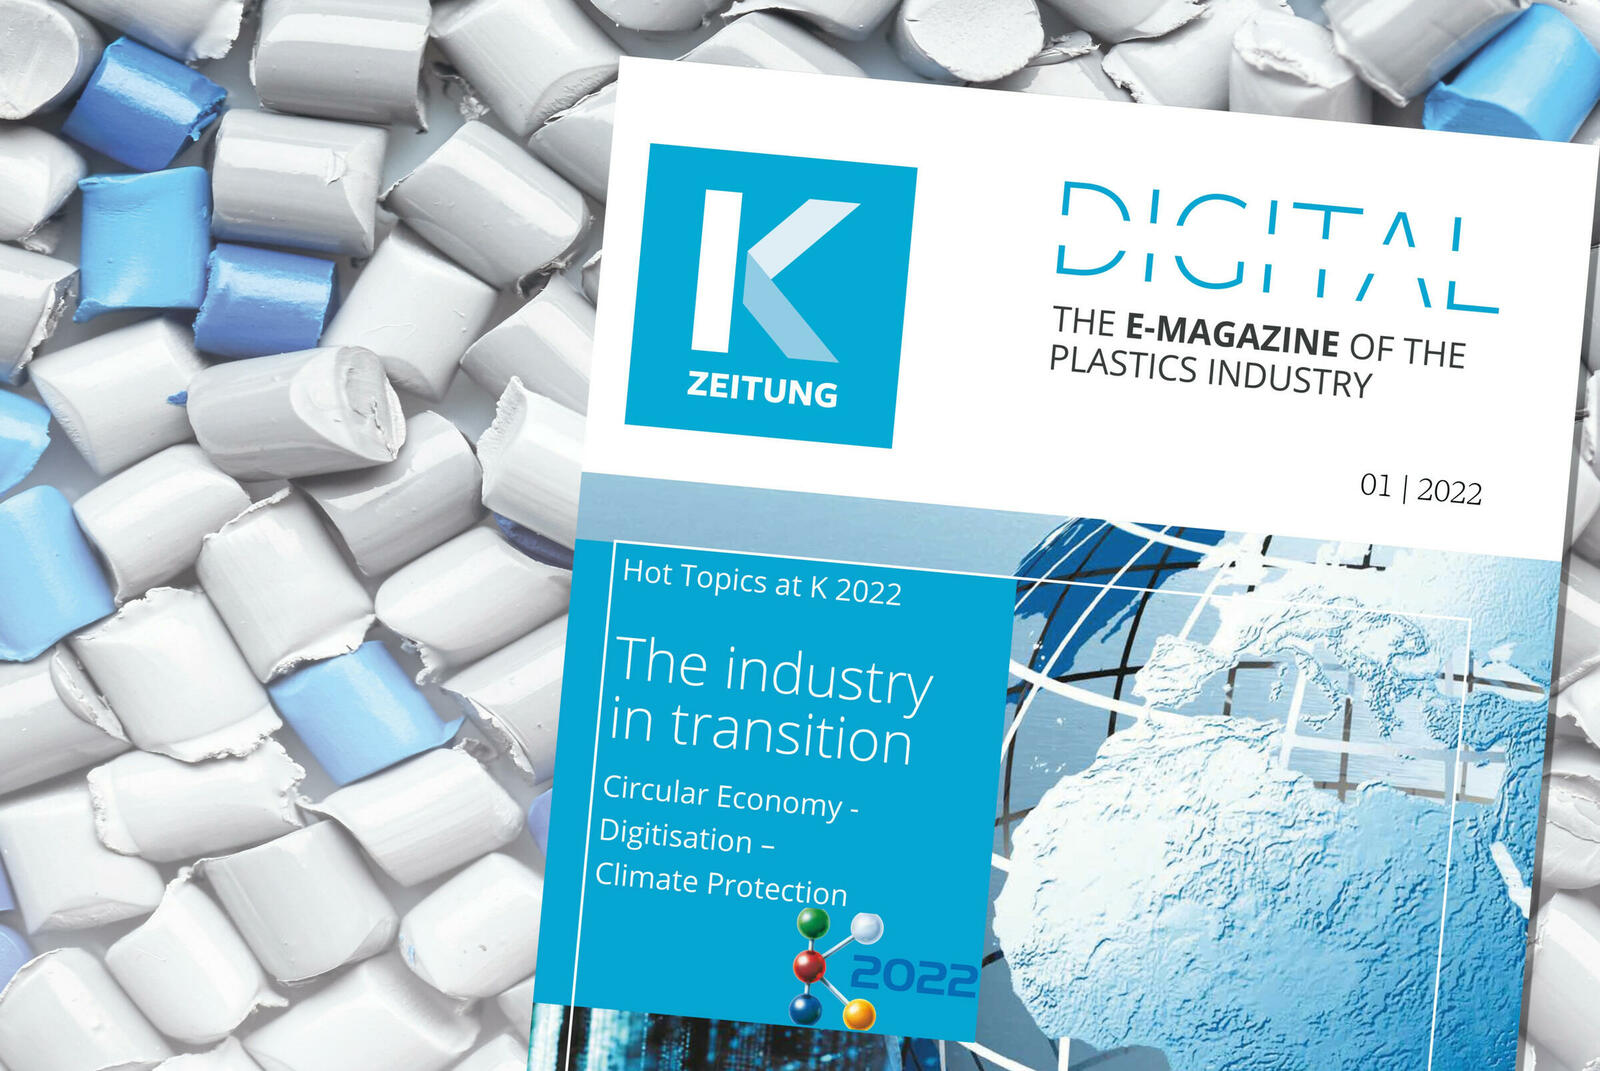 The K-ZEITUNG e-magazine in the run-up to K 2022 takes up the hot topics of circular economy, digitalisation and climate protection.